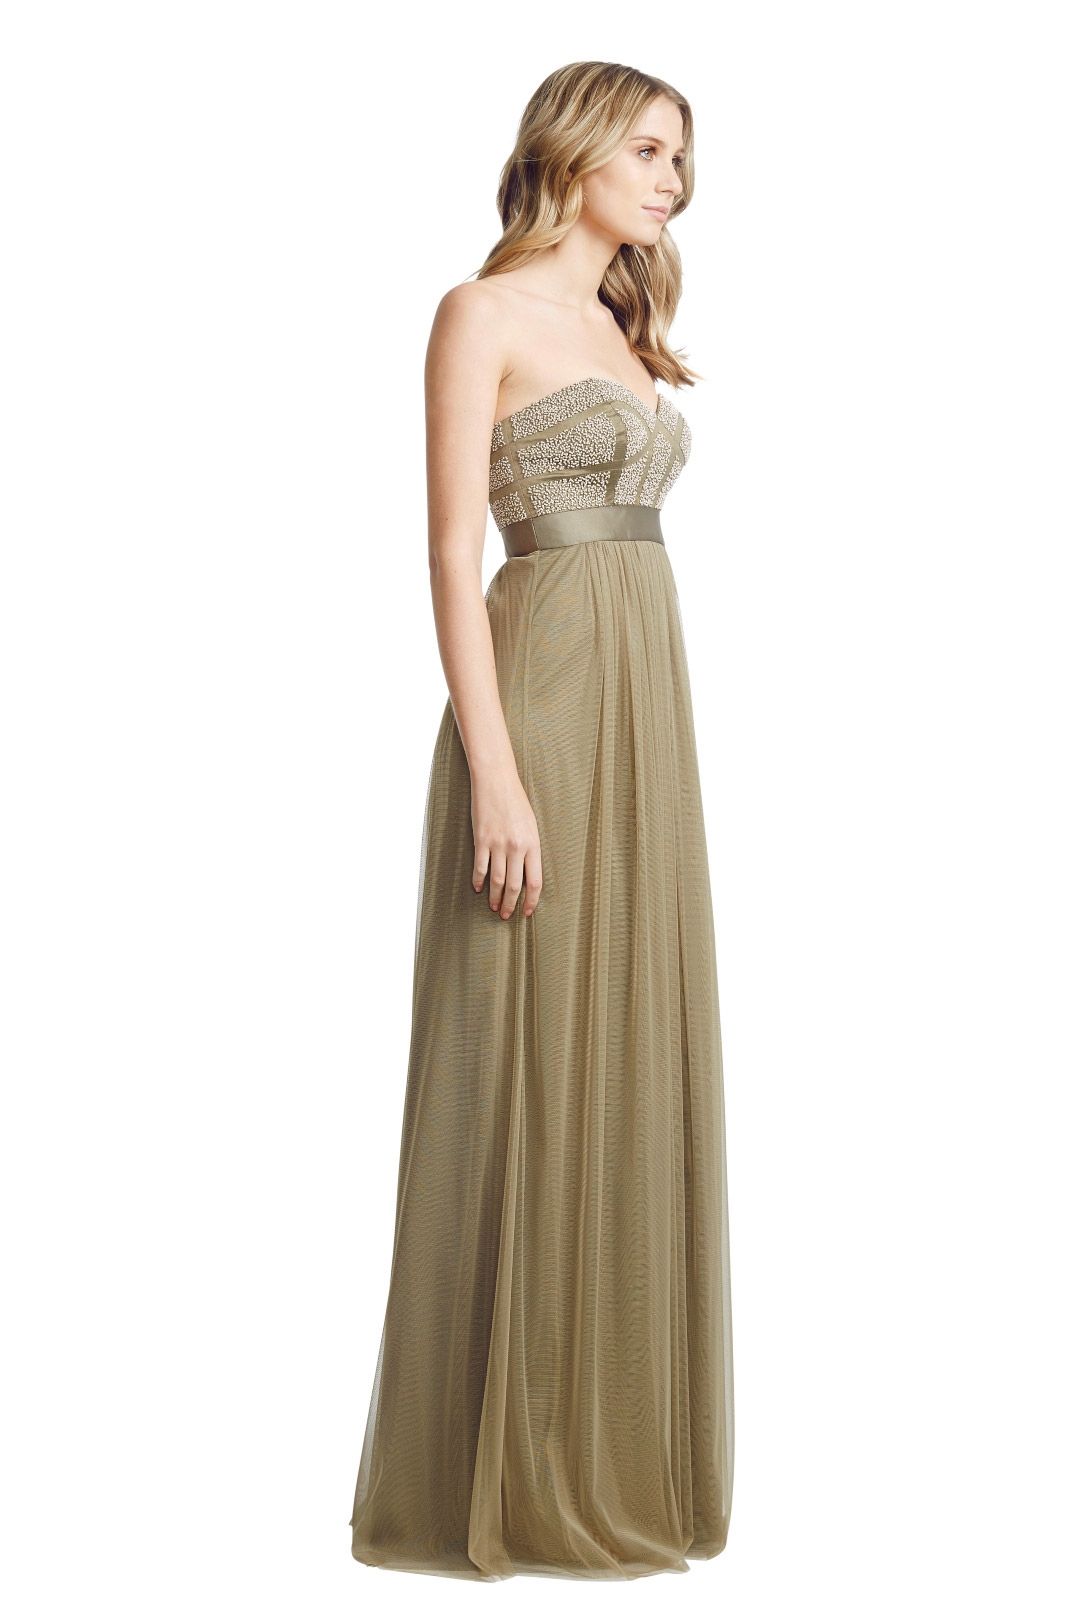 George - Pixel Gown - Olive - Side